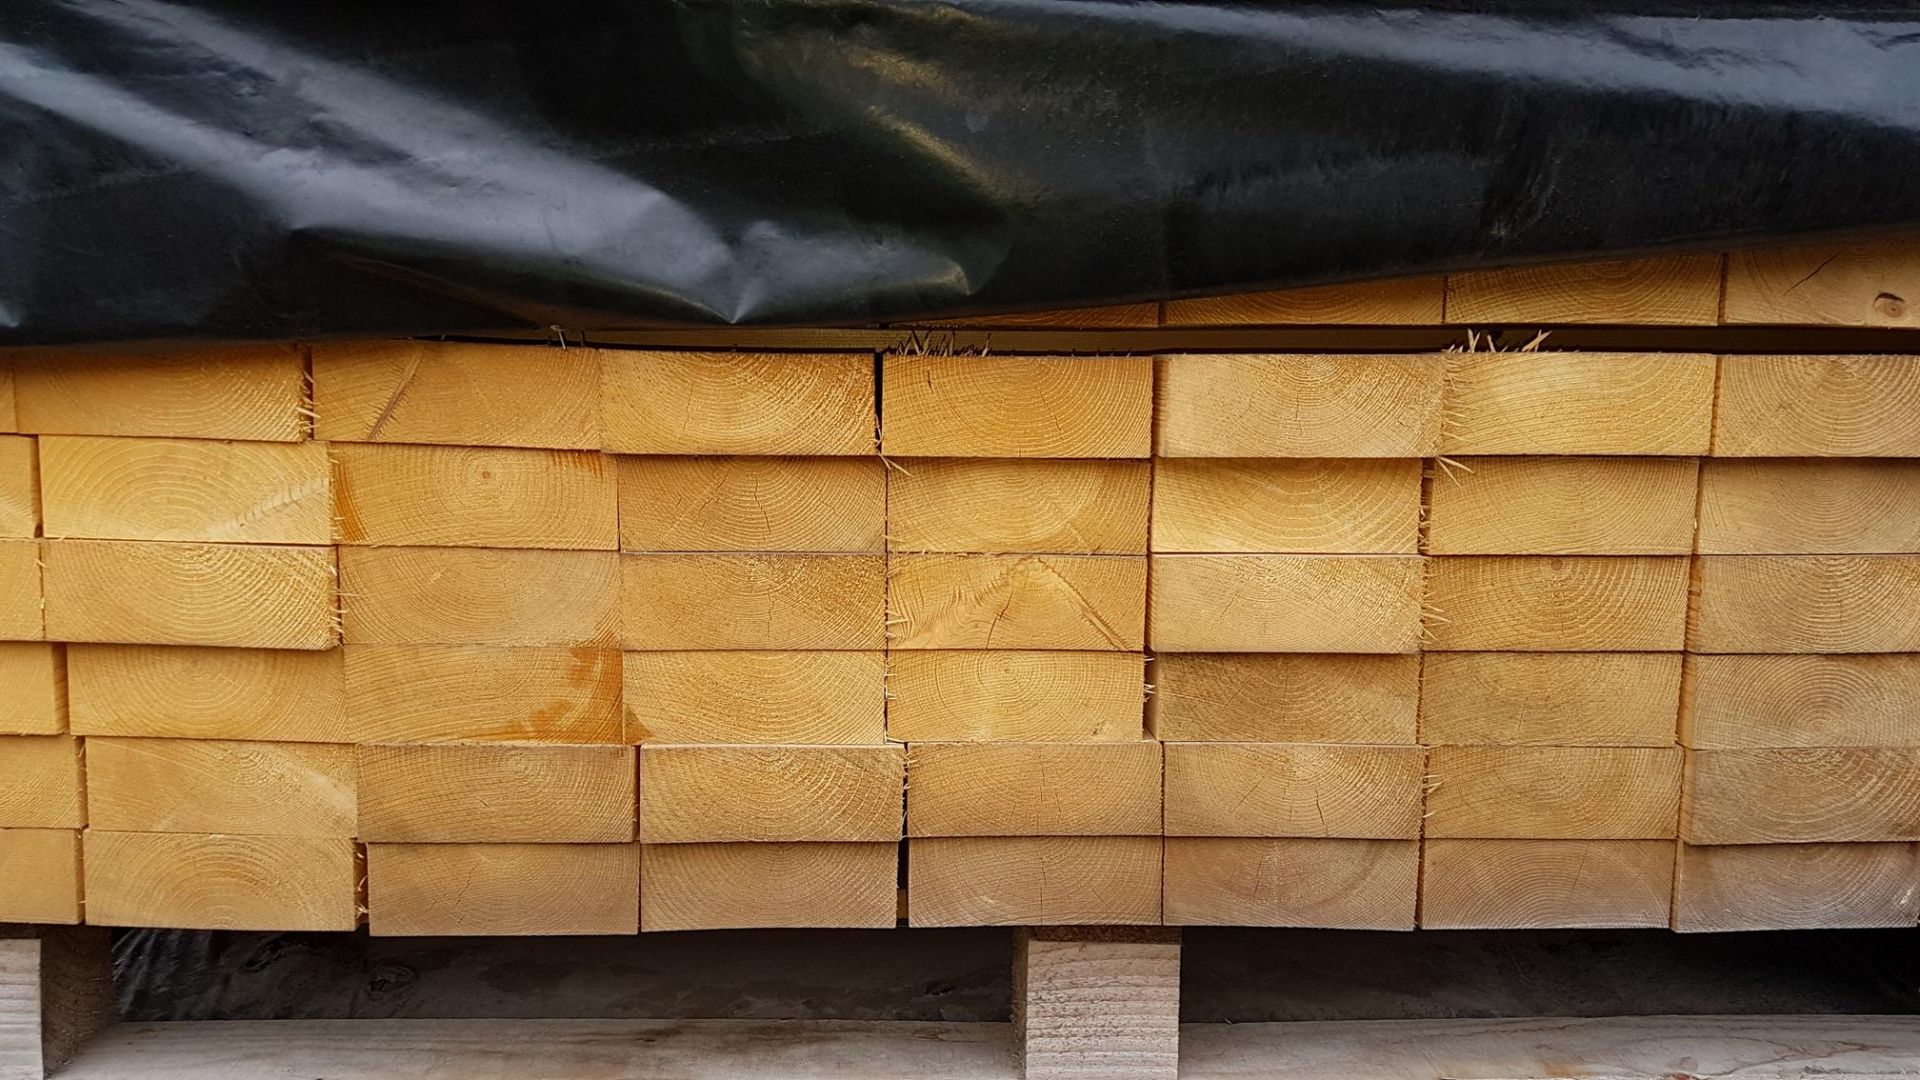 * Timber: 47x125 (45x120), regularised TR26, 99 pieces @ 900mm length. Sellers ref. X1442. This